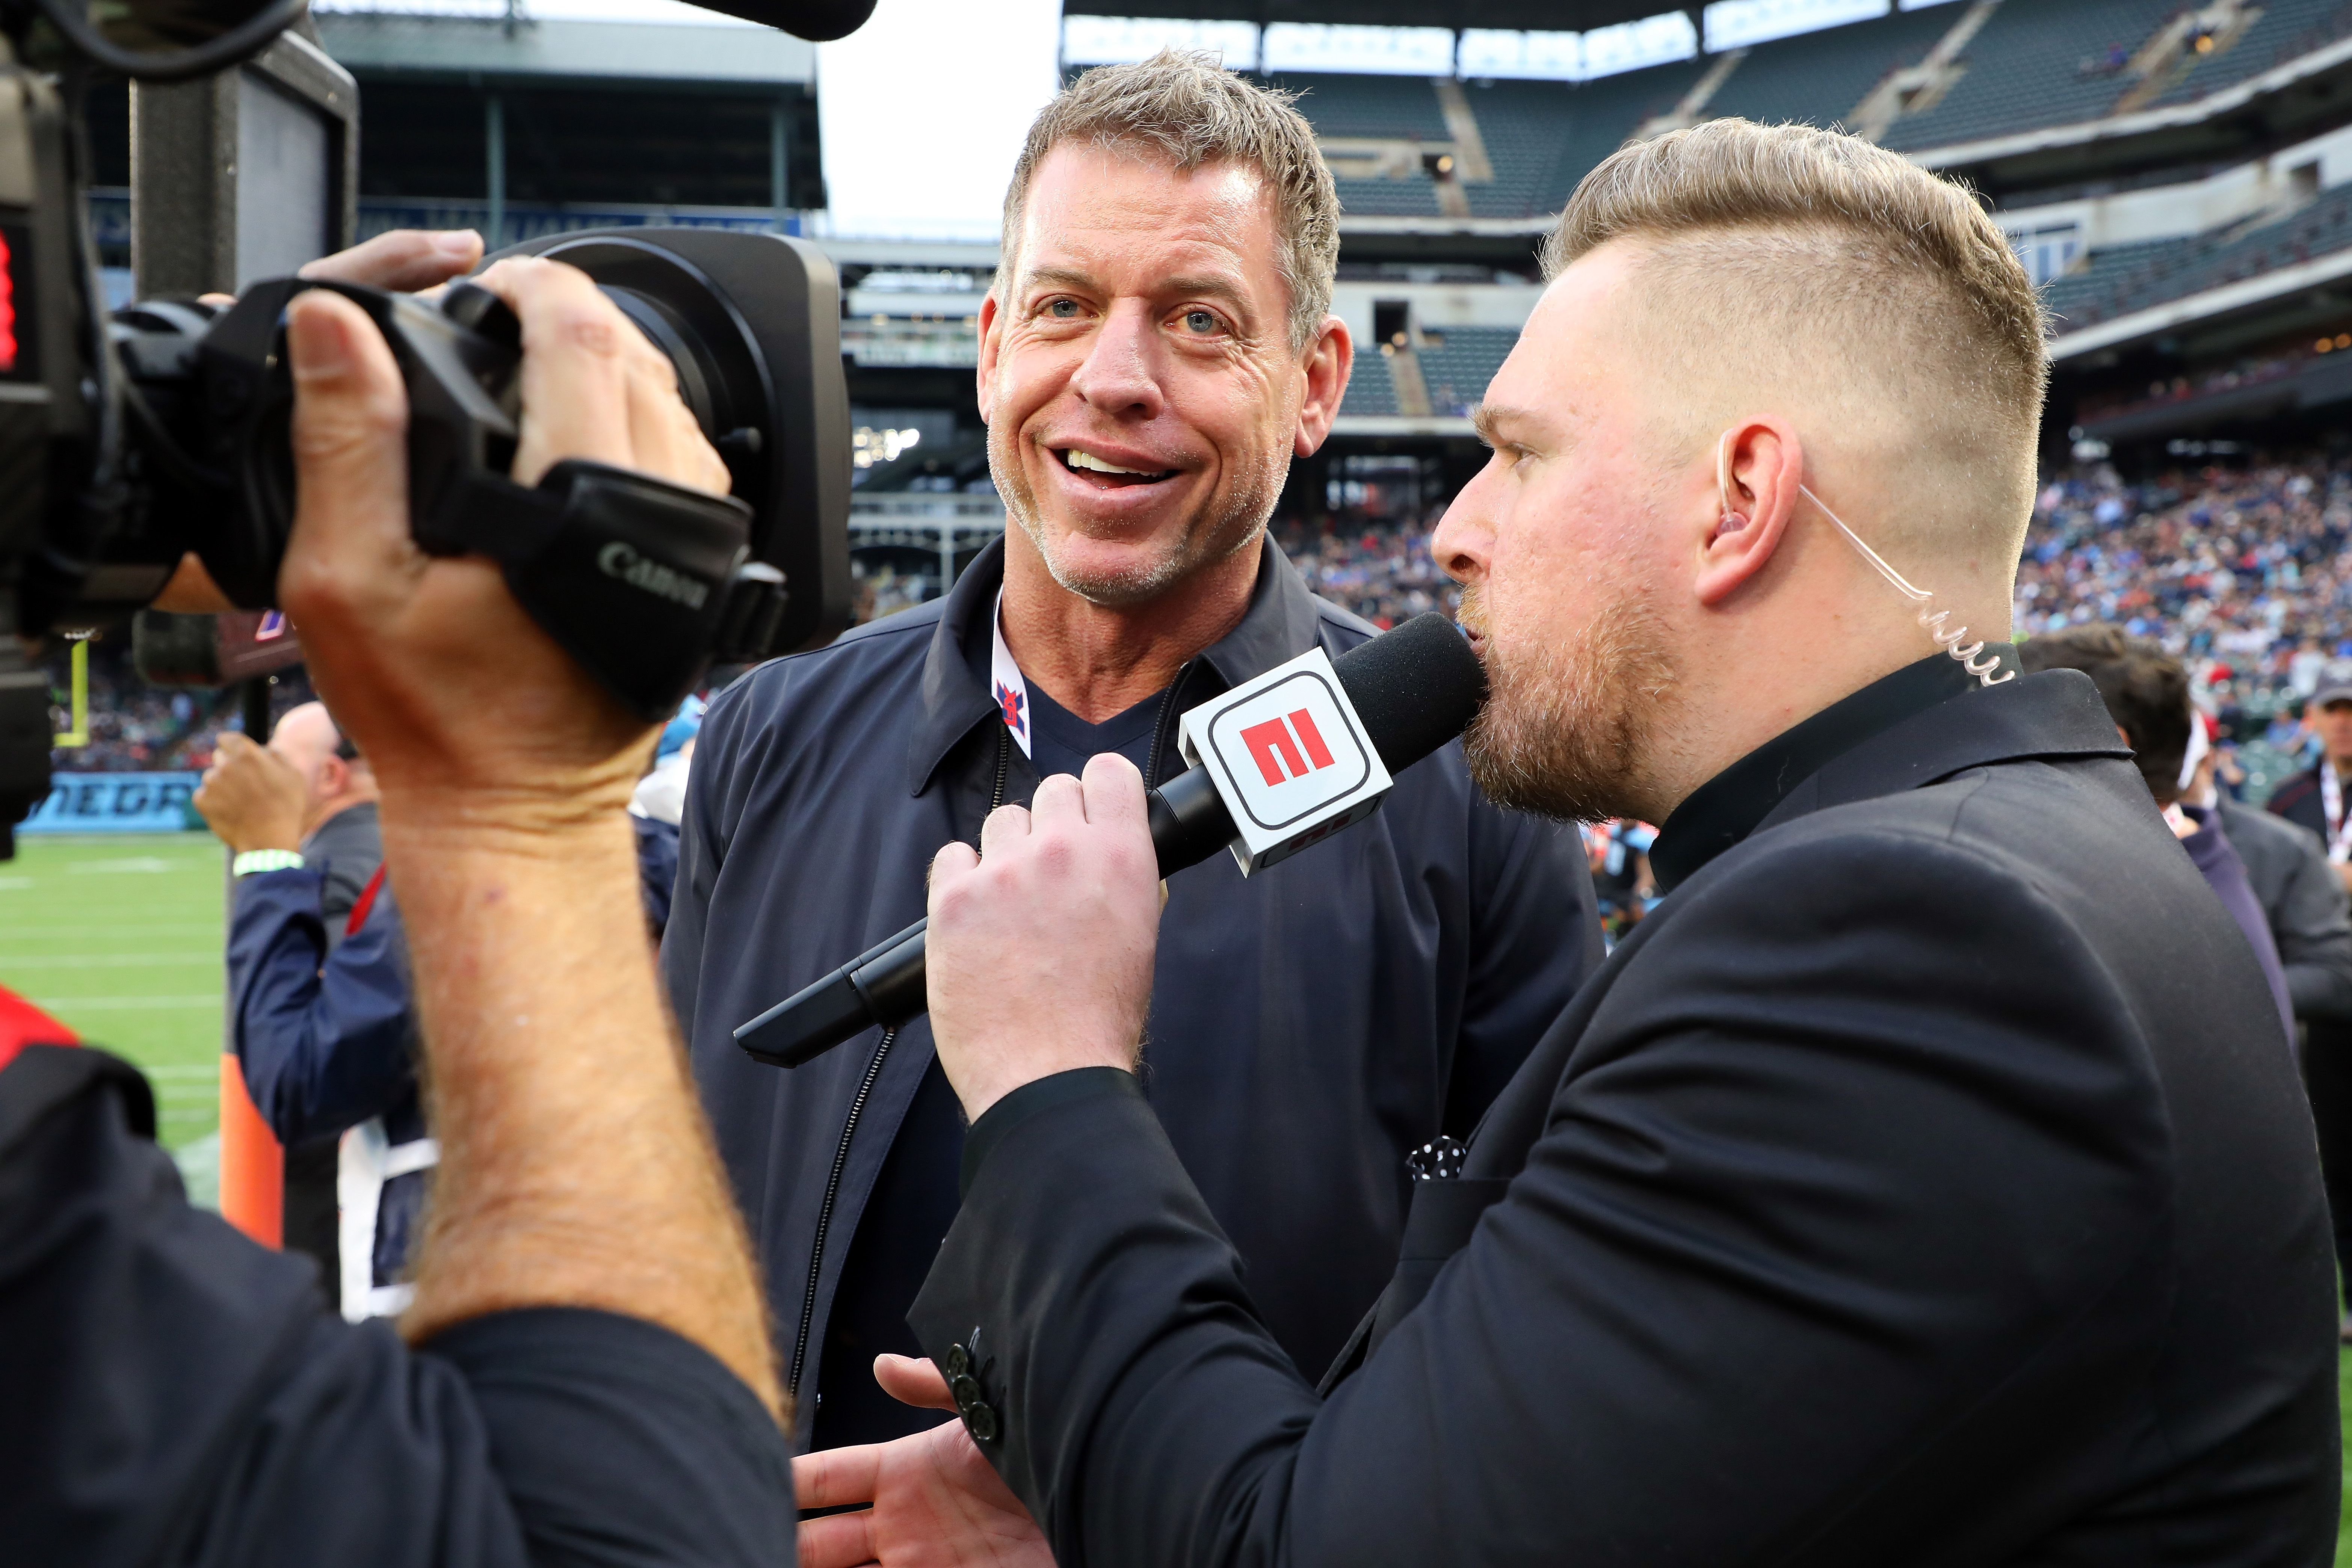 Cowboys Legend Troy Aikman Used Quarantine to Get in the Best Shape of His Life